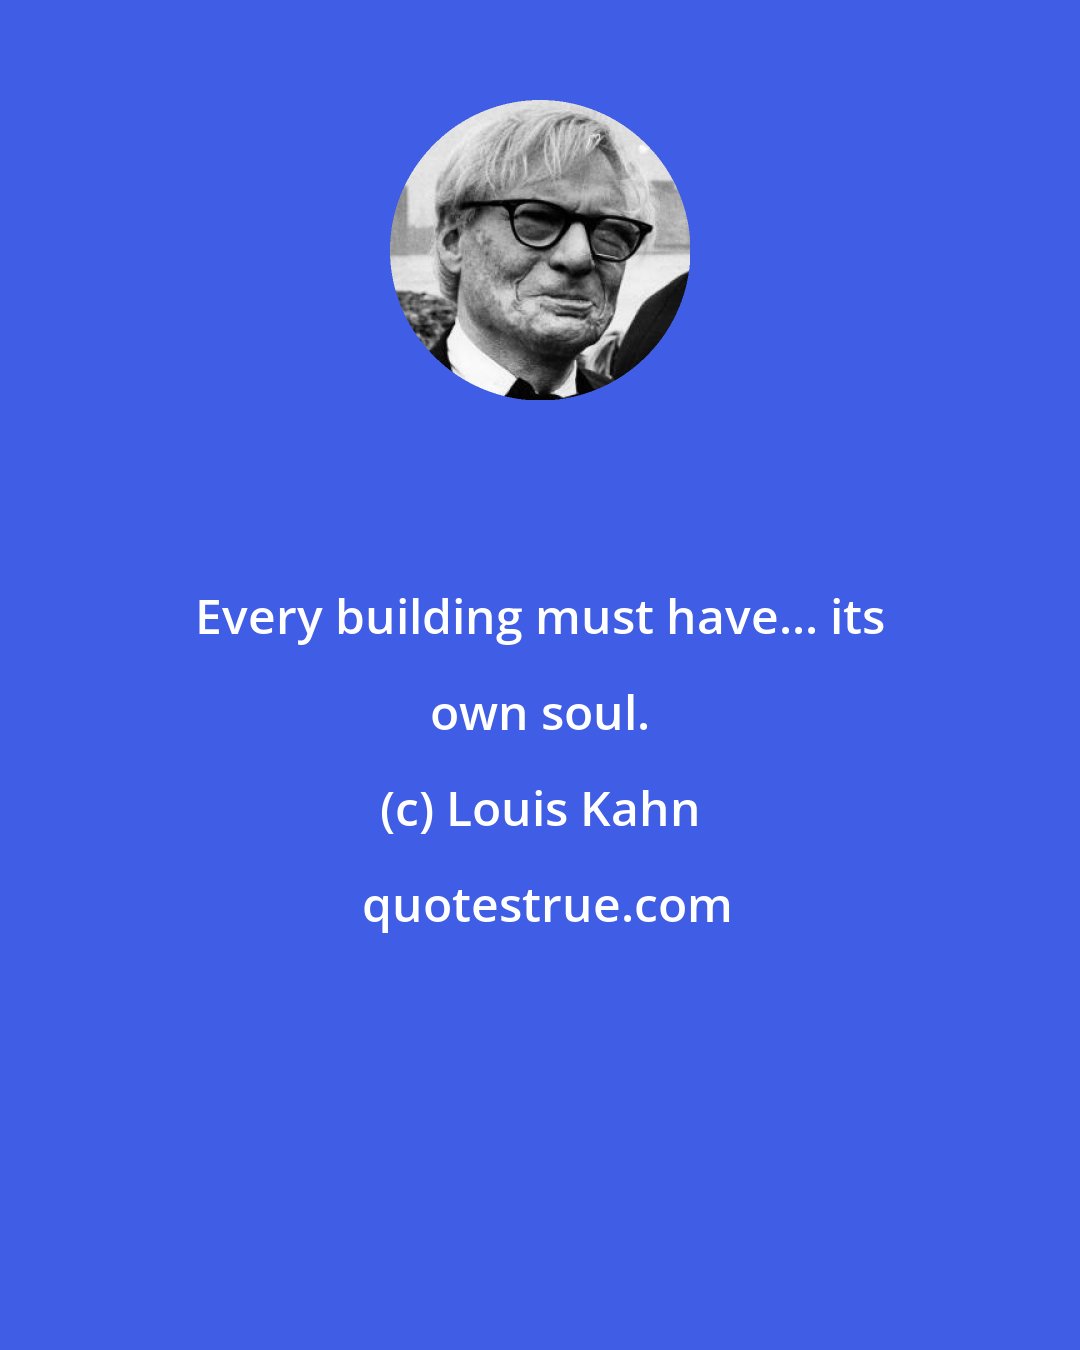 Louis Kahn: Every building must have... its own soul.